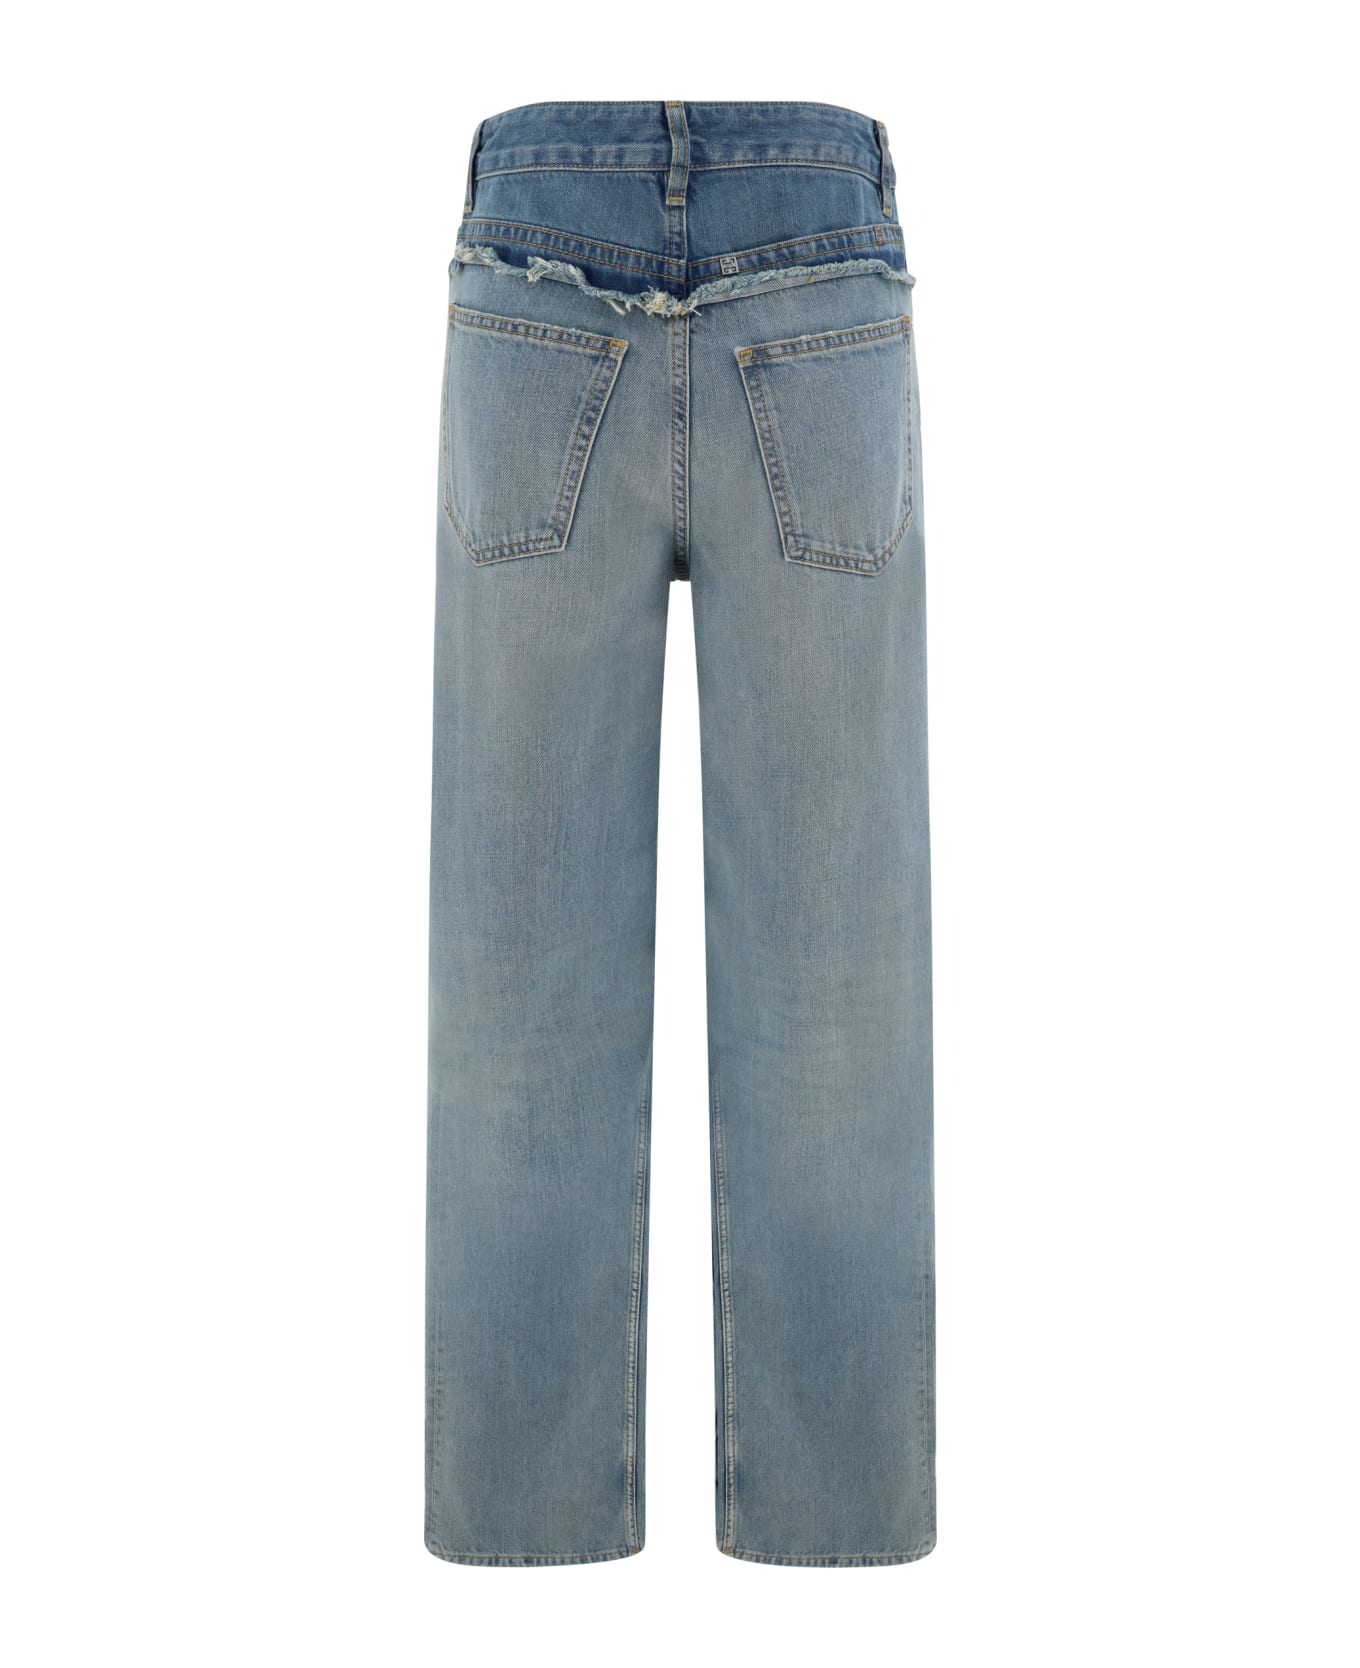 Givenchy Wide-leg Jeans - Blue